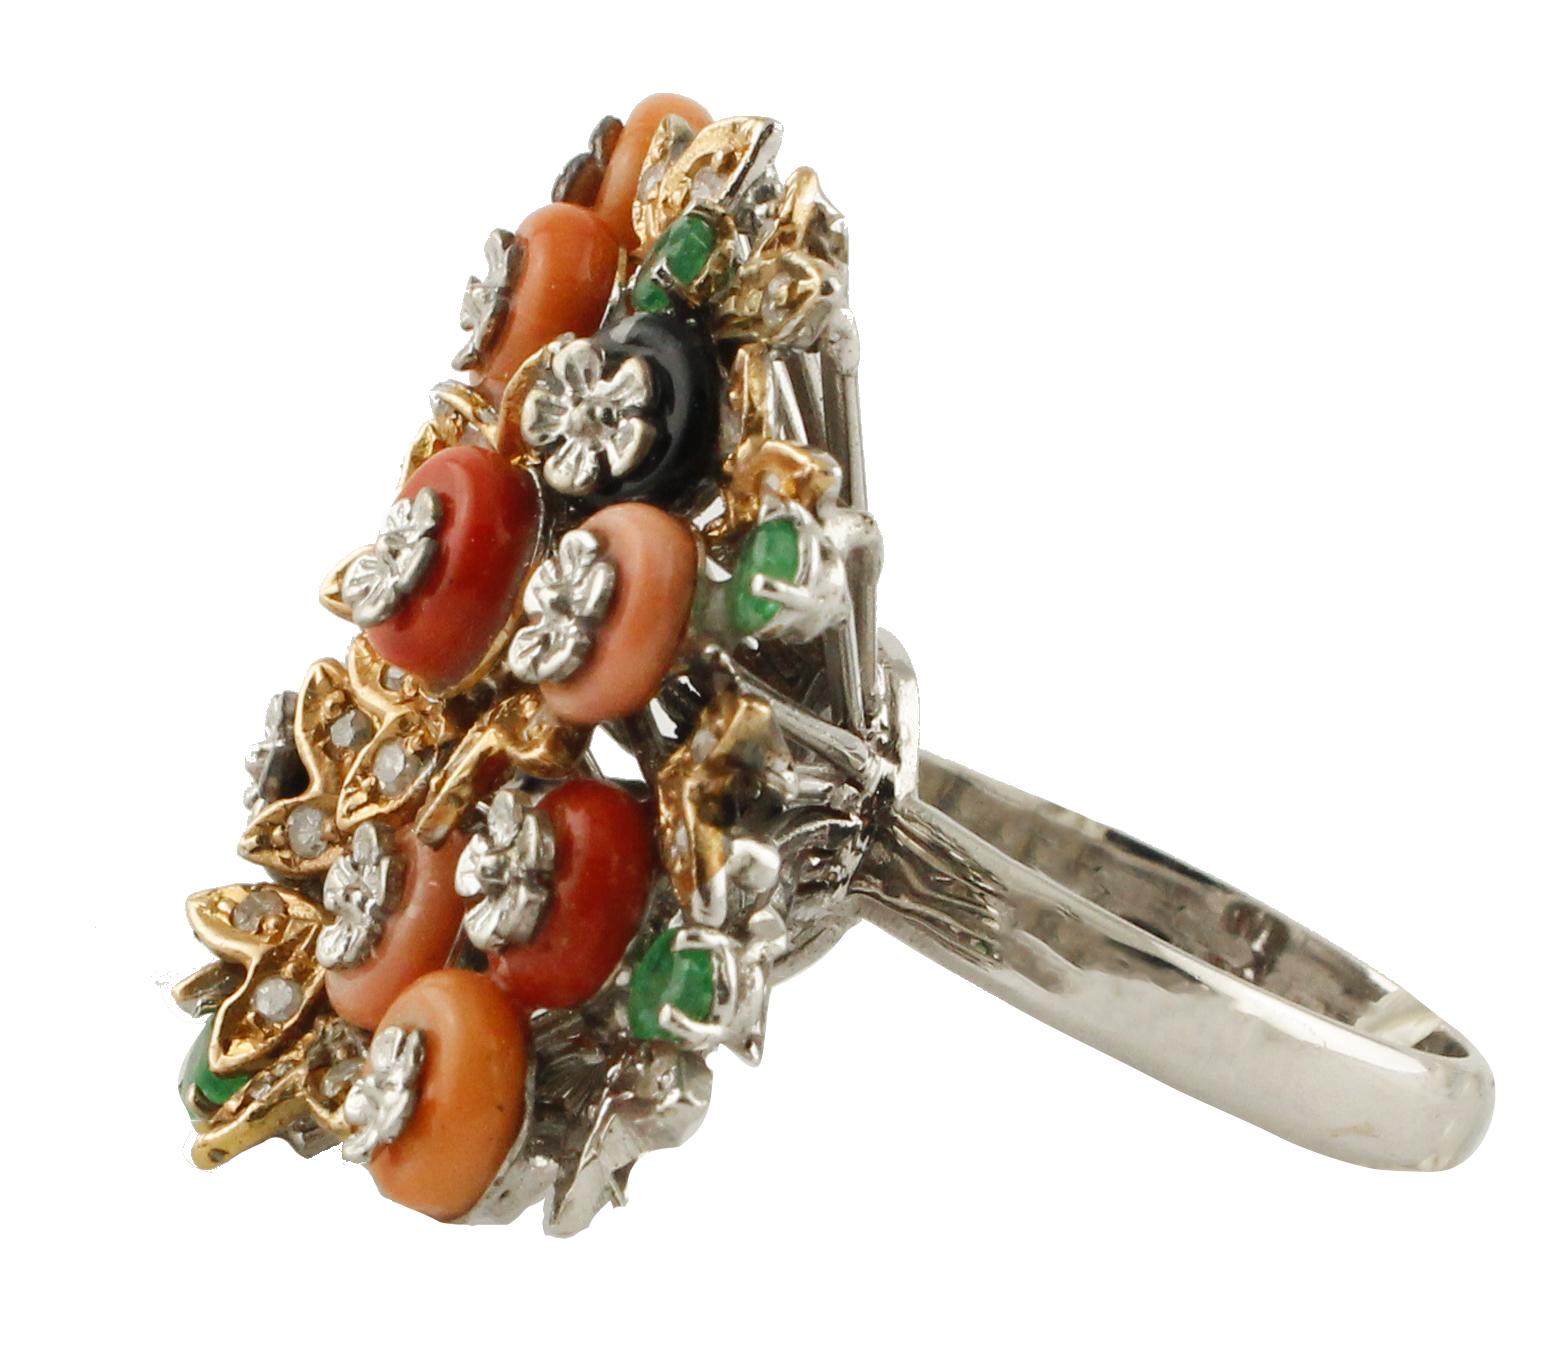 Fashion ring in 14K white gold structure mounted with rose gold leaved studded by diamonds, and adorned with emeralds, onyx hoops,and (pink, orange, red) coral hoops. All hoops have on them white gold little flowers.
Diamonds 0.34 ct
Emeralds 0.45